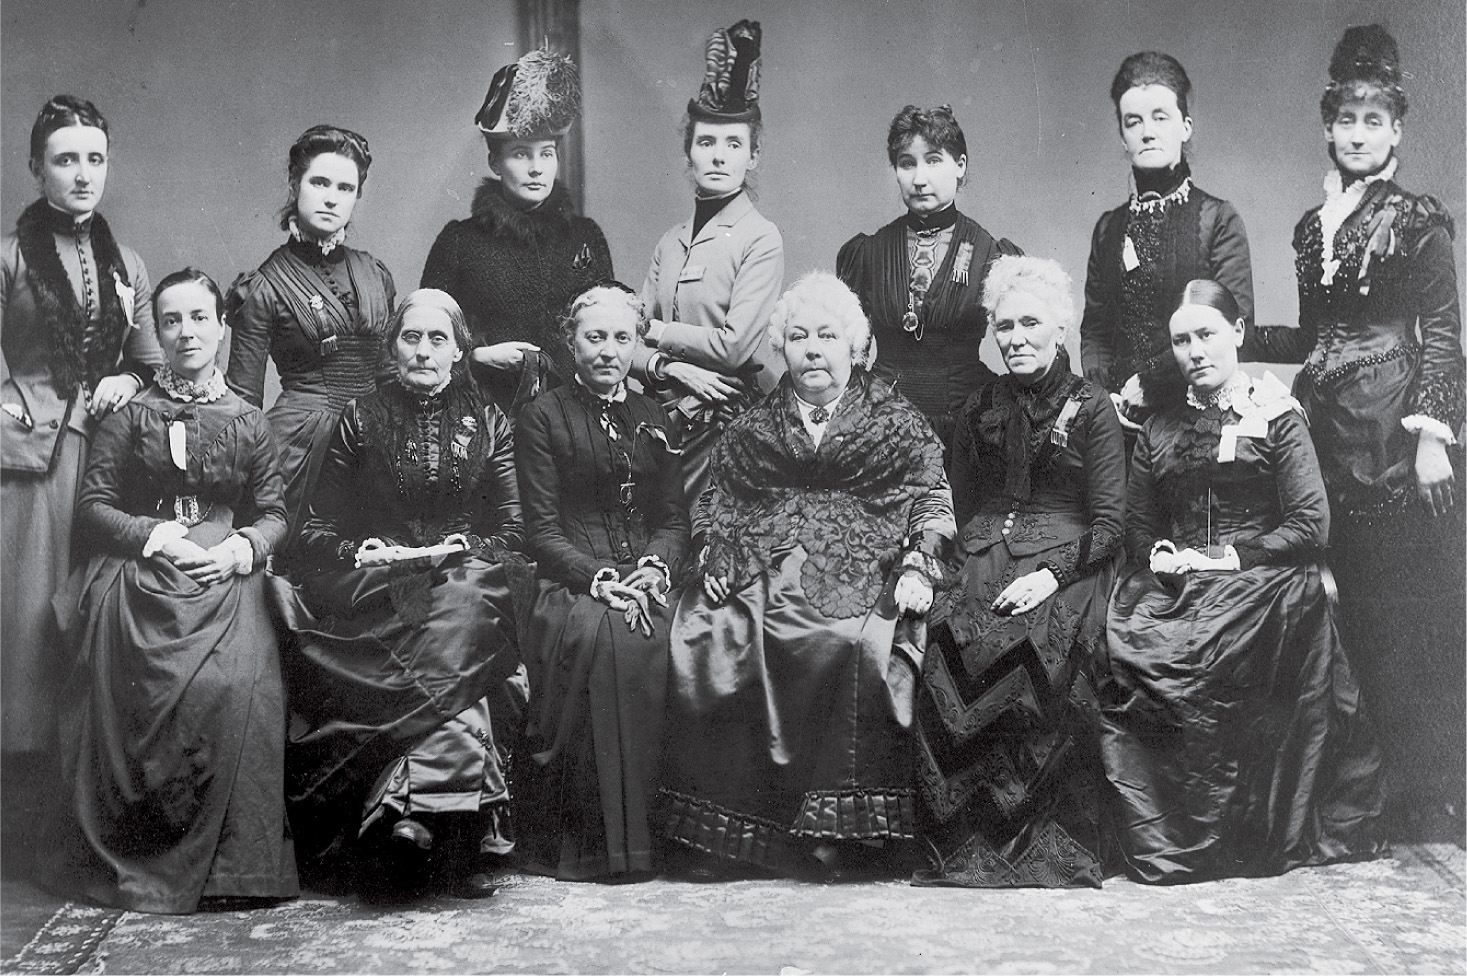 13 women pose
toegther in a black and white photo.